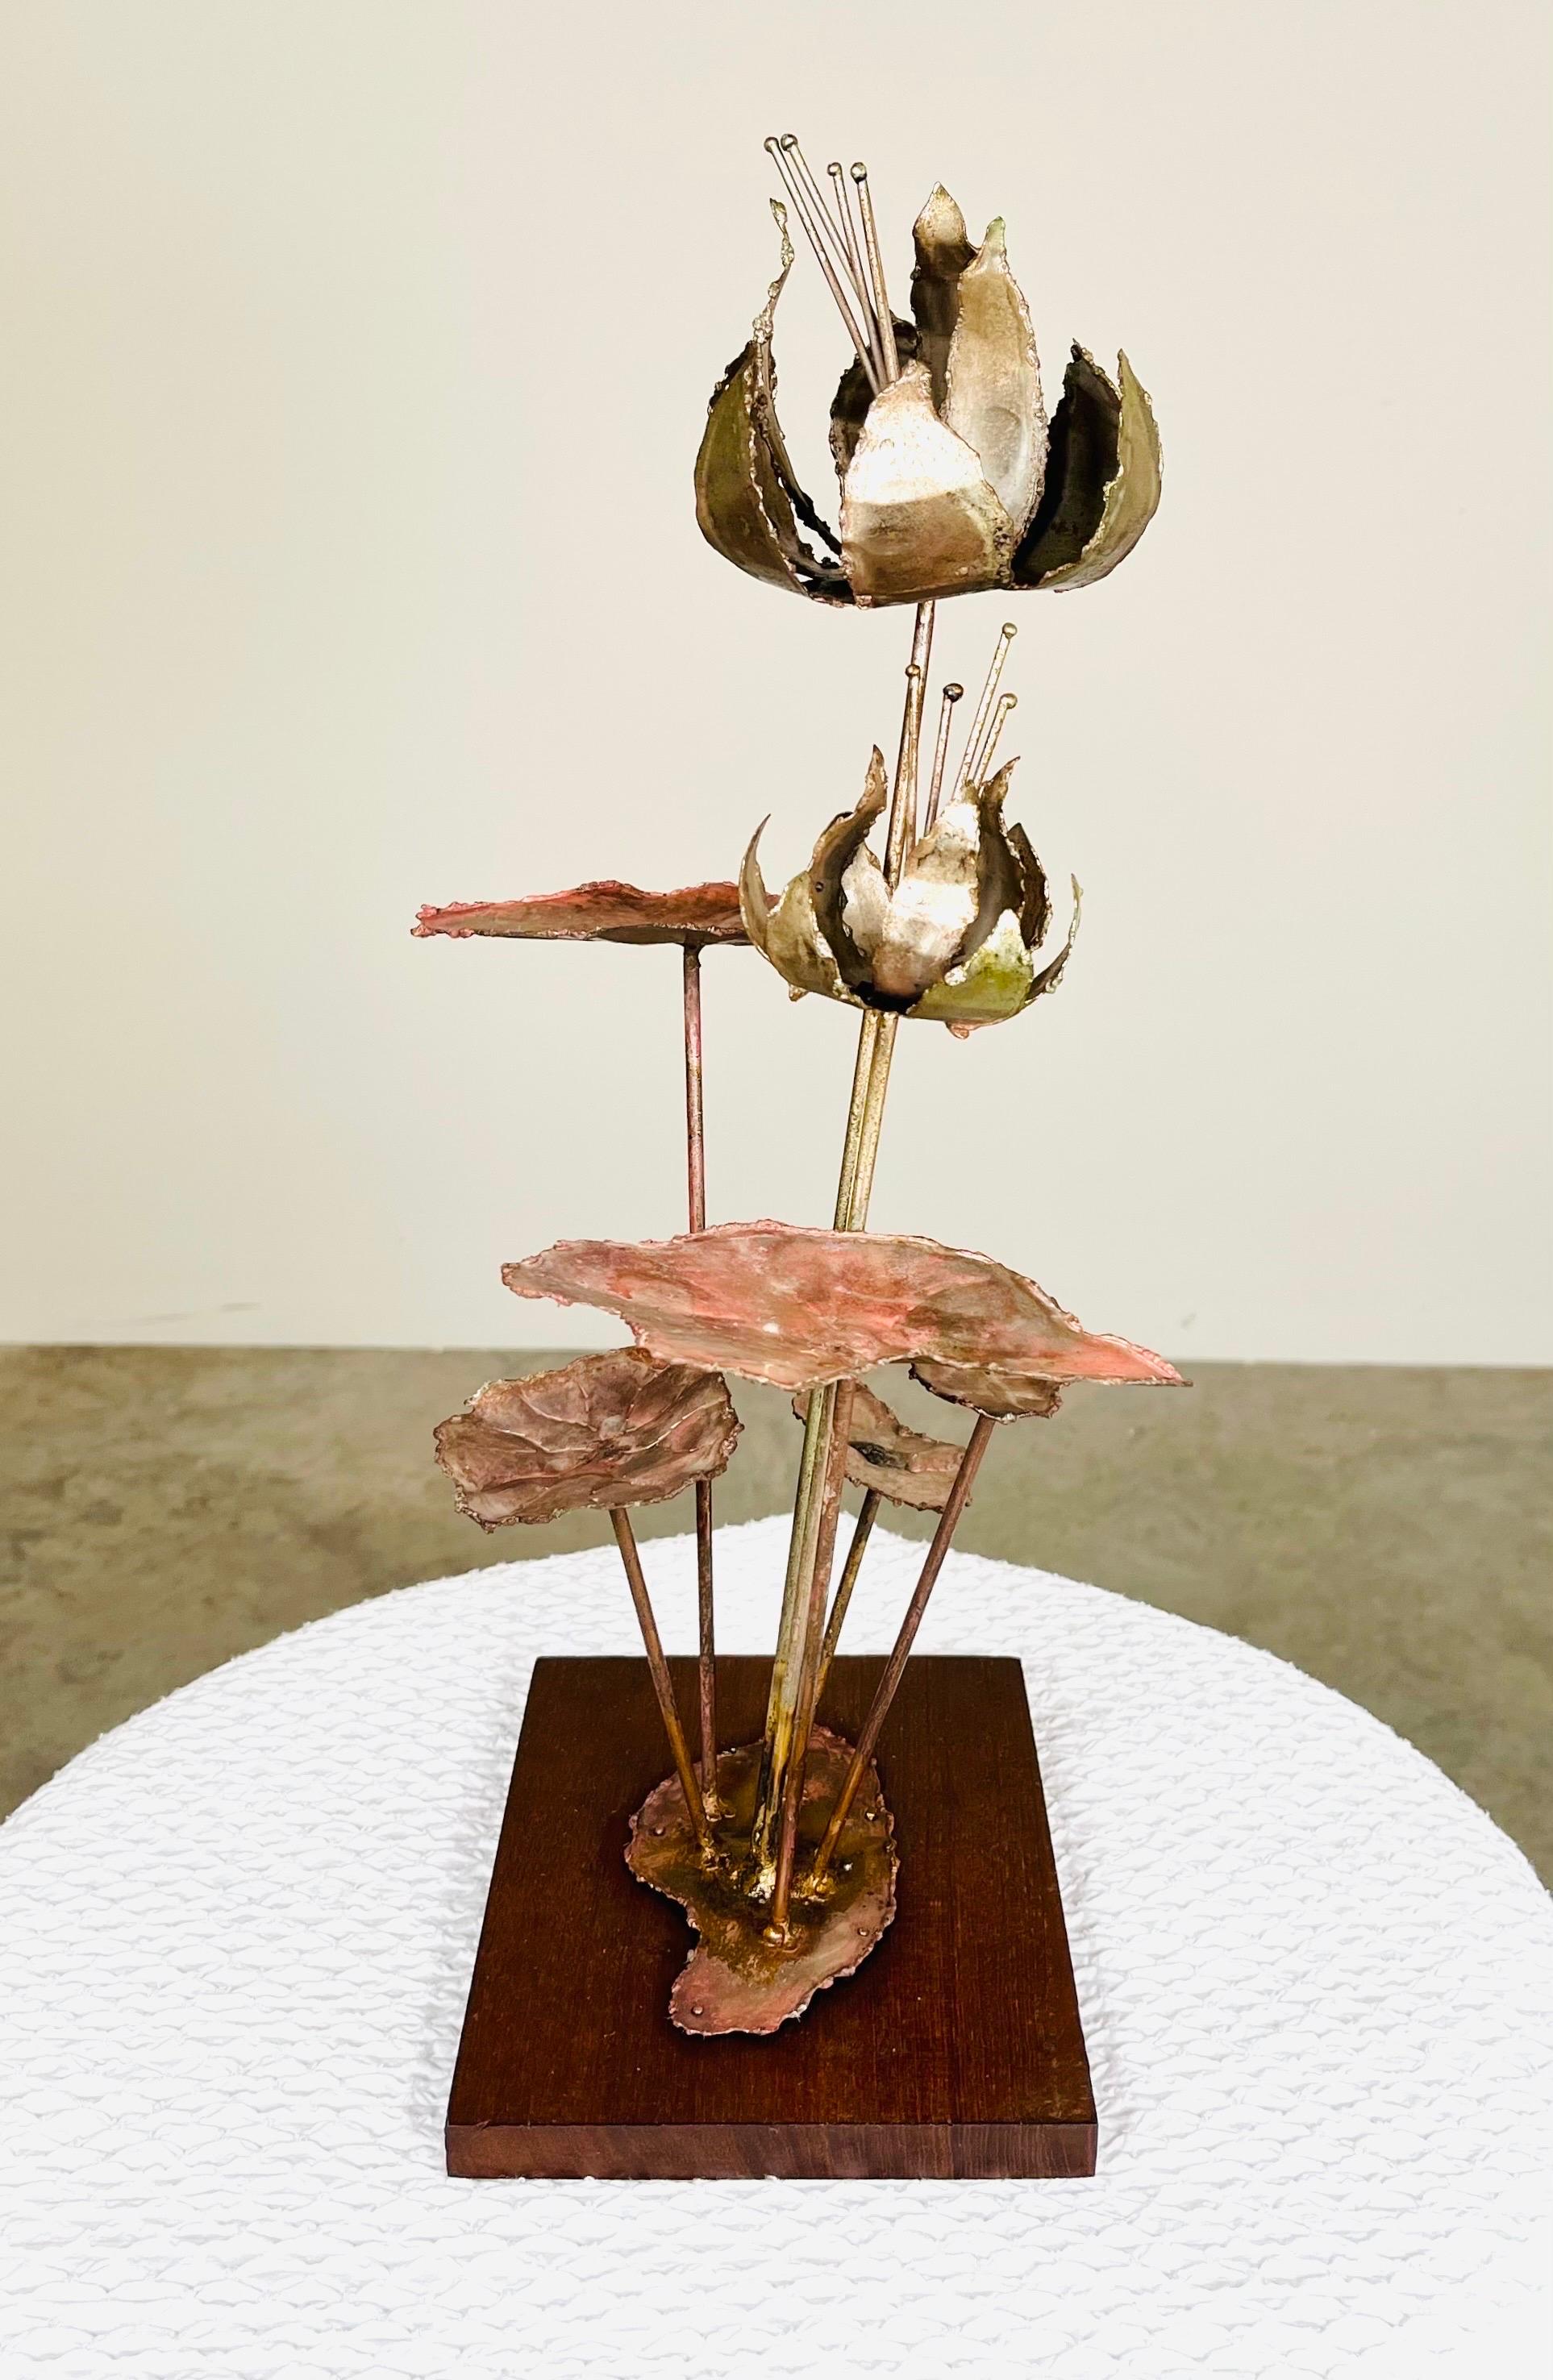 An attractive accent lily sculpture having steel flowers with copper leaves in the manner of C. Jere. In fabulous, clean condition. circa 1960.
Measures: 17.5x8x6” HWD.